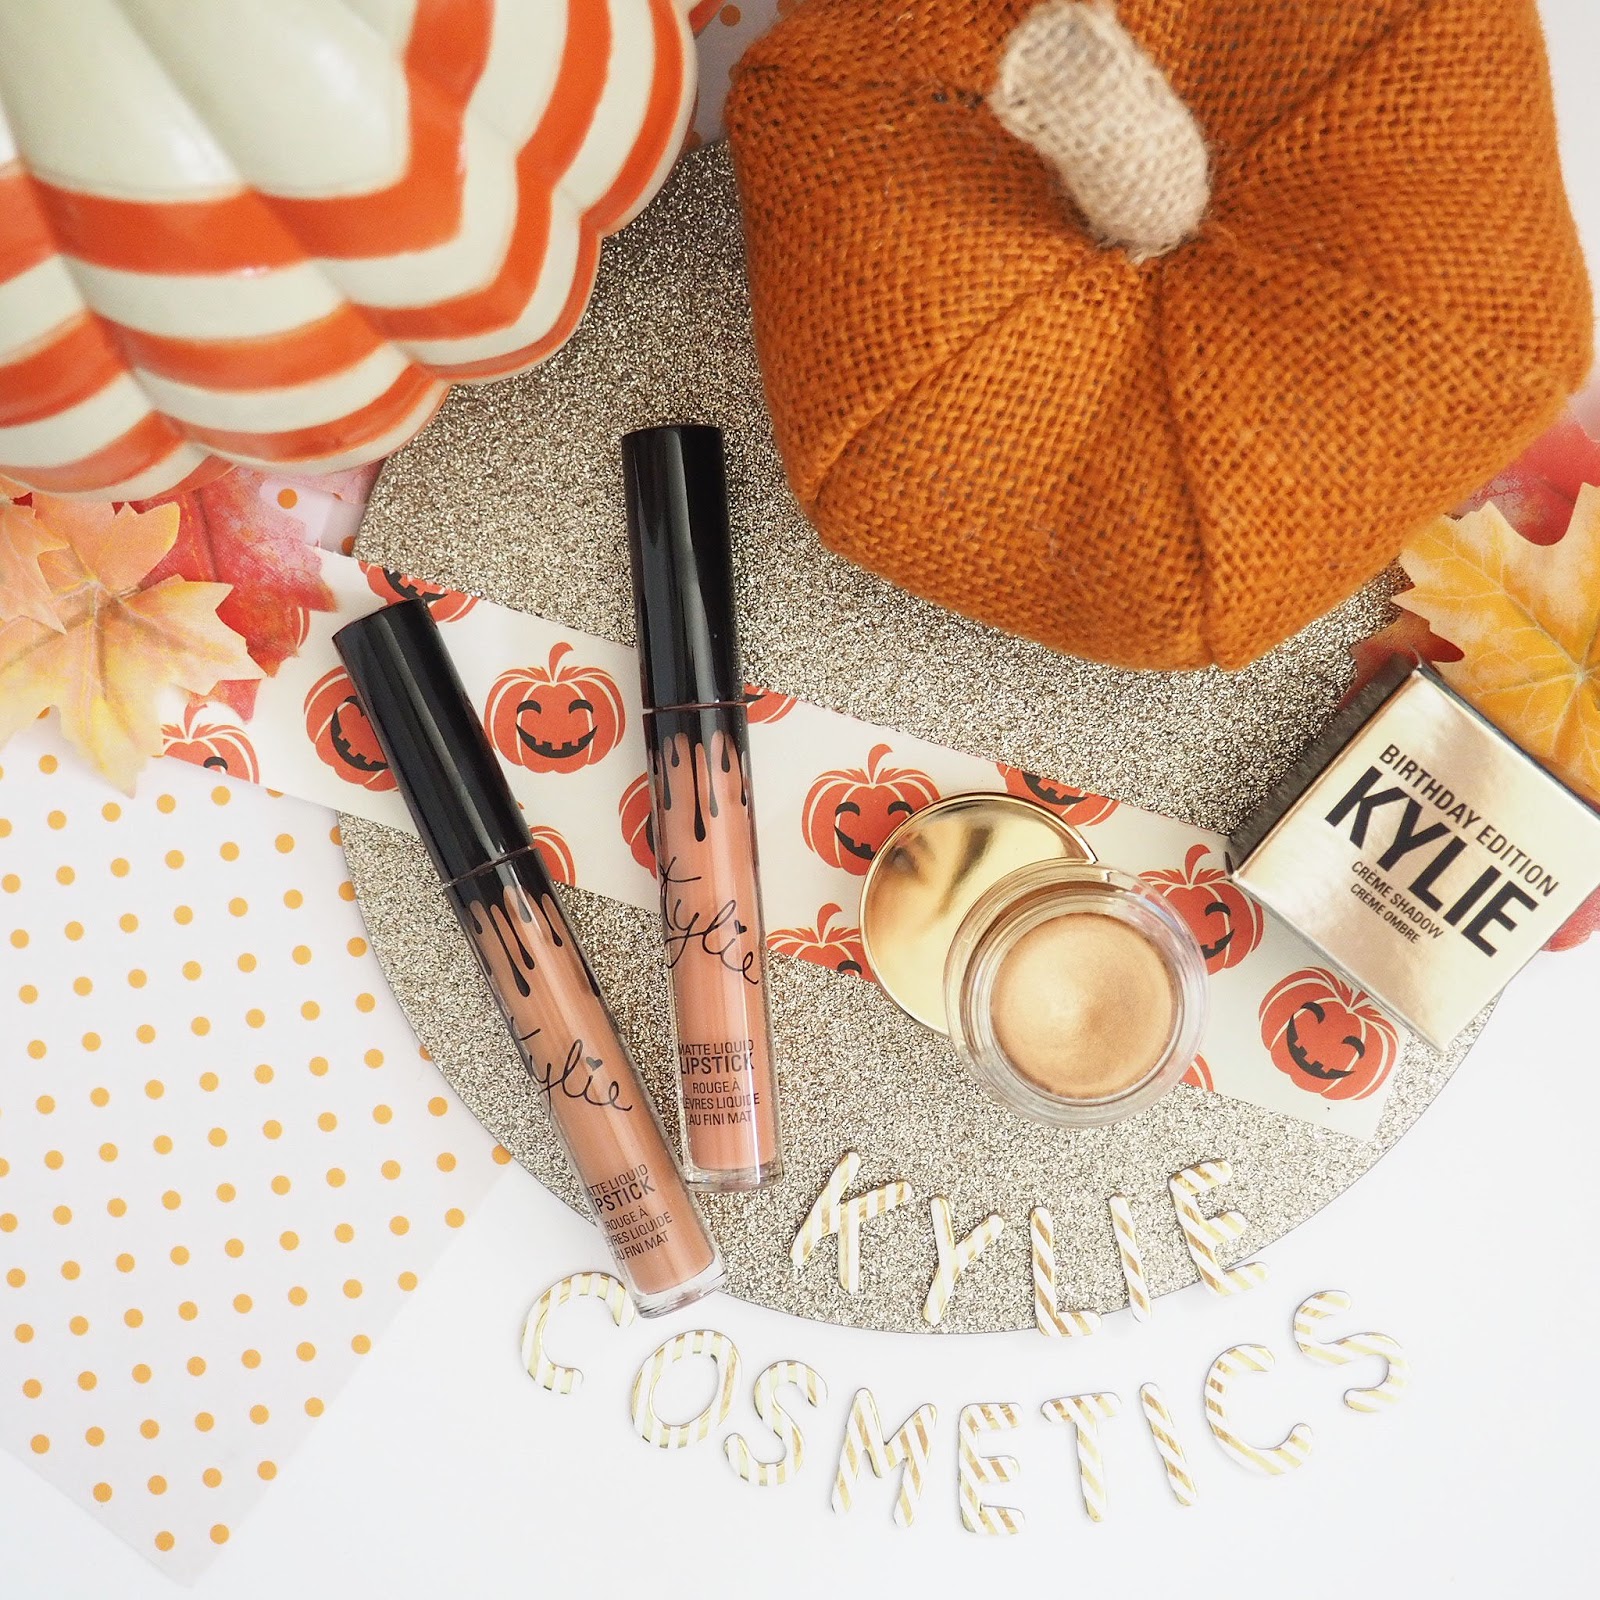 kylie cosmetics, kylie cosmetics birthday edition copper creme, kylie cosmetics uk review, kylie cosmetics review, dirty peach review, exposed review, kylie jenner make up